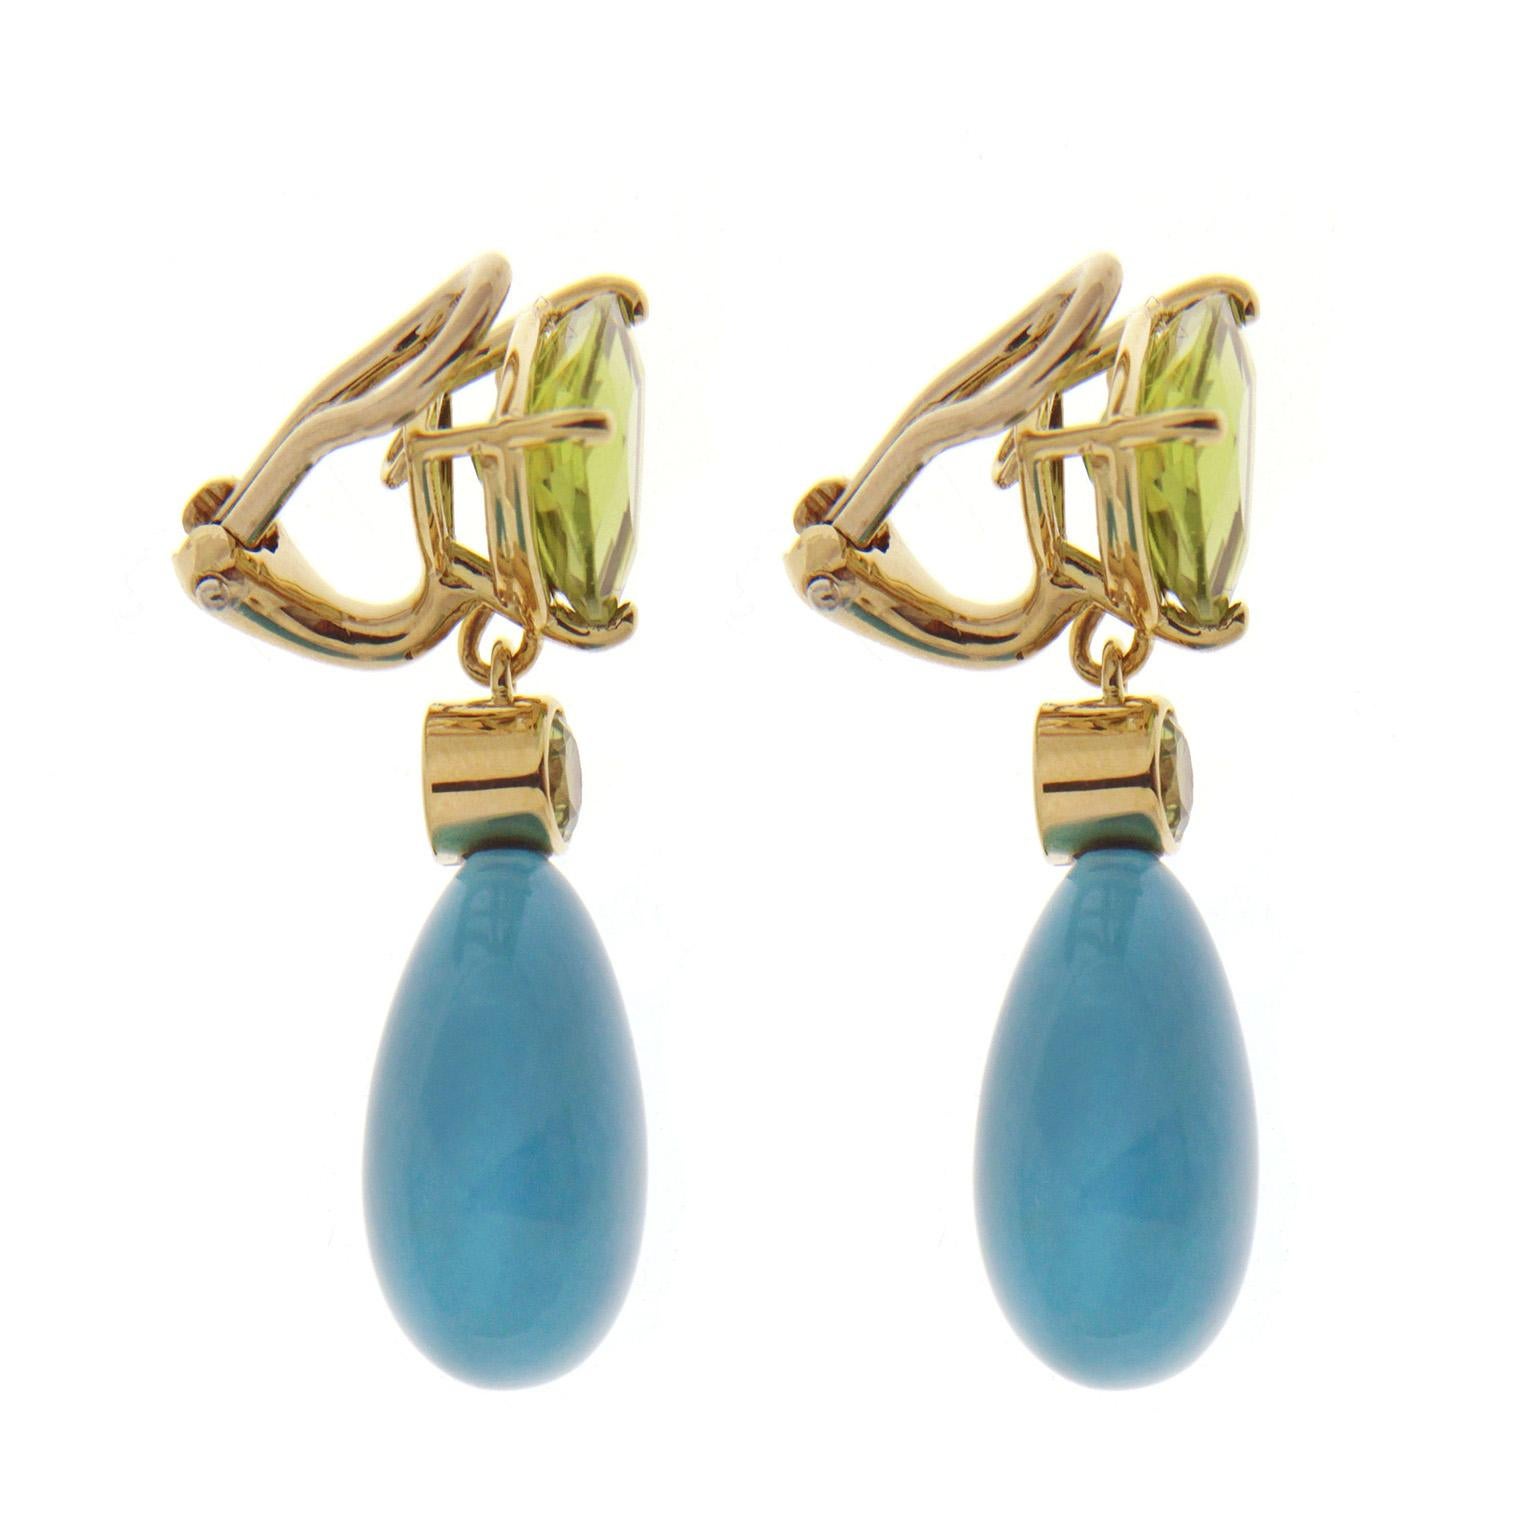 Green and blue enliven these drop earrings created by Valentin Magro. Their base is 18 yellow gold supporting a trilliant peridot with curved sides. Emerging from the bottom most point is a gold ball, bezel set peridot and a turquoise cabochon. The